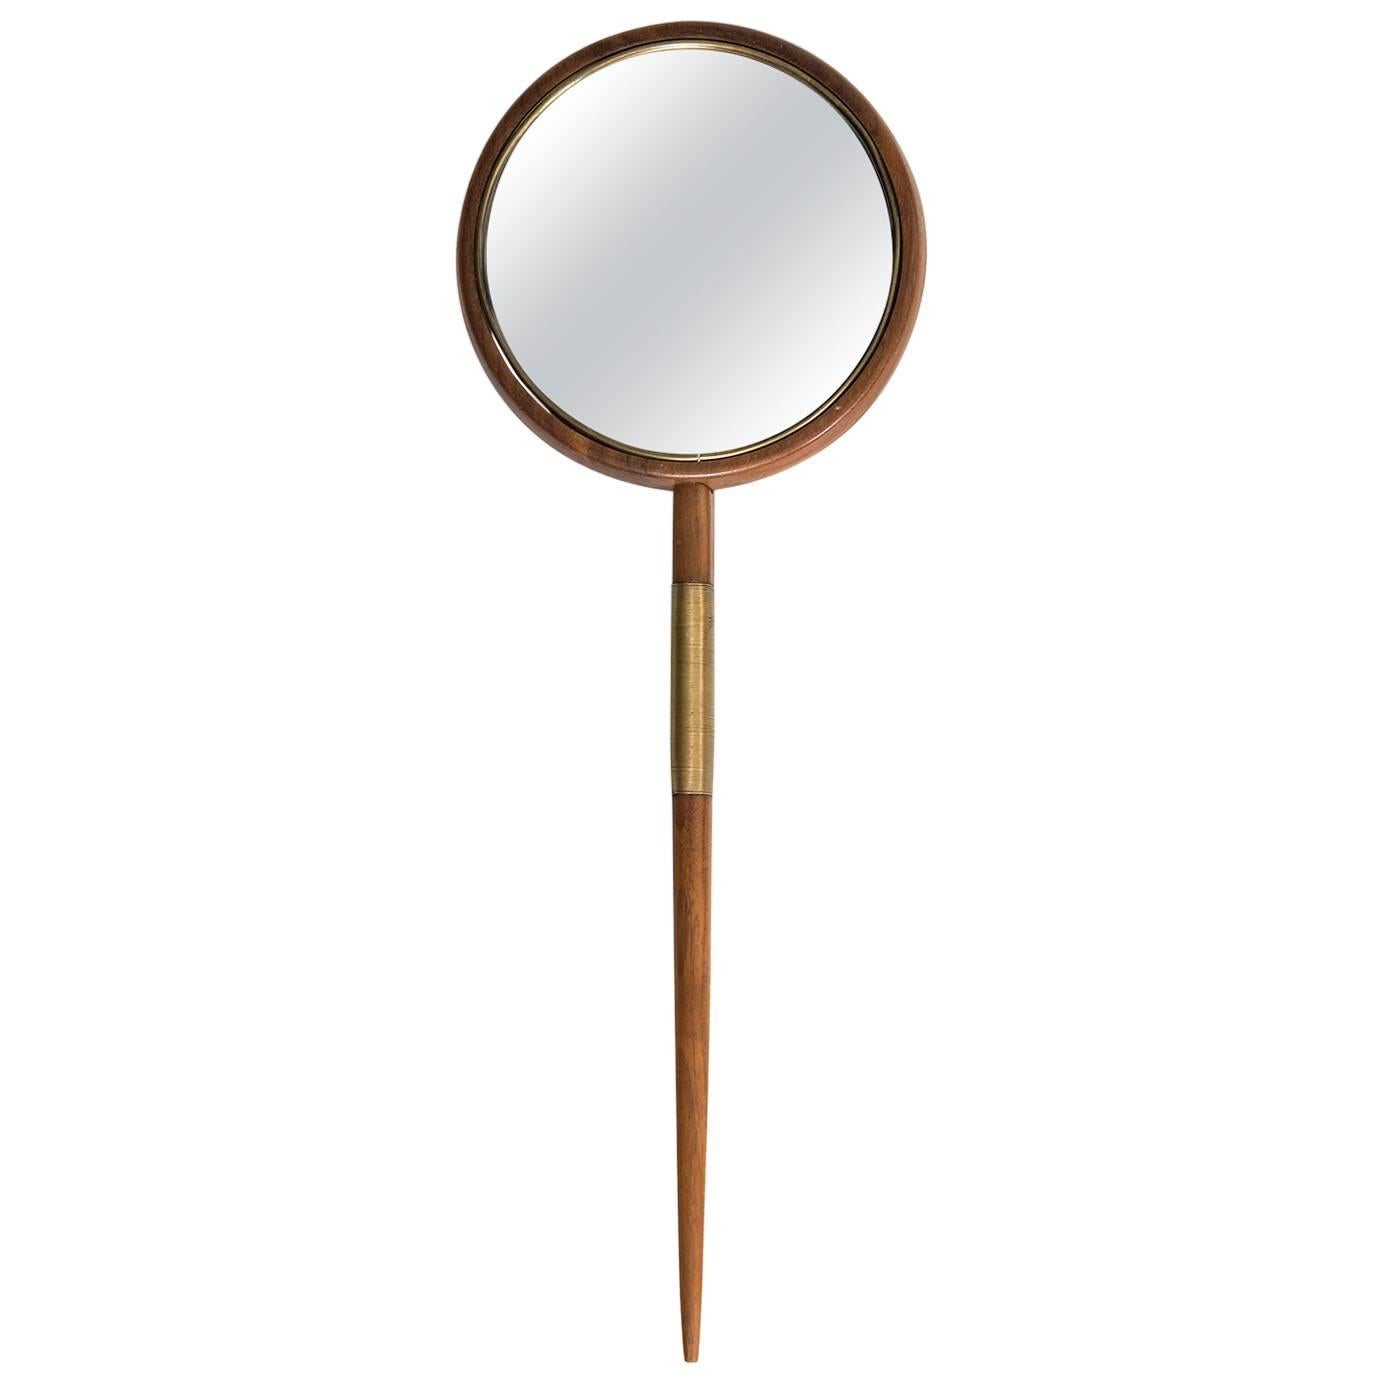 Rare Hand Mirror Probably Produced in Sweden